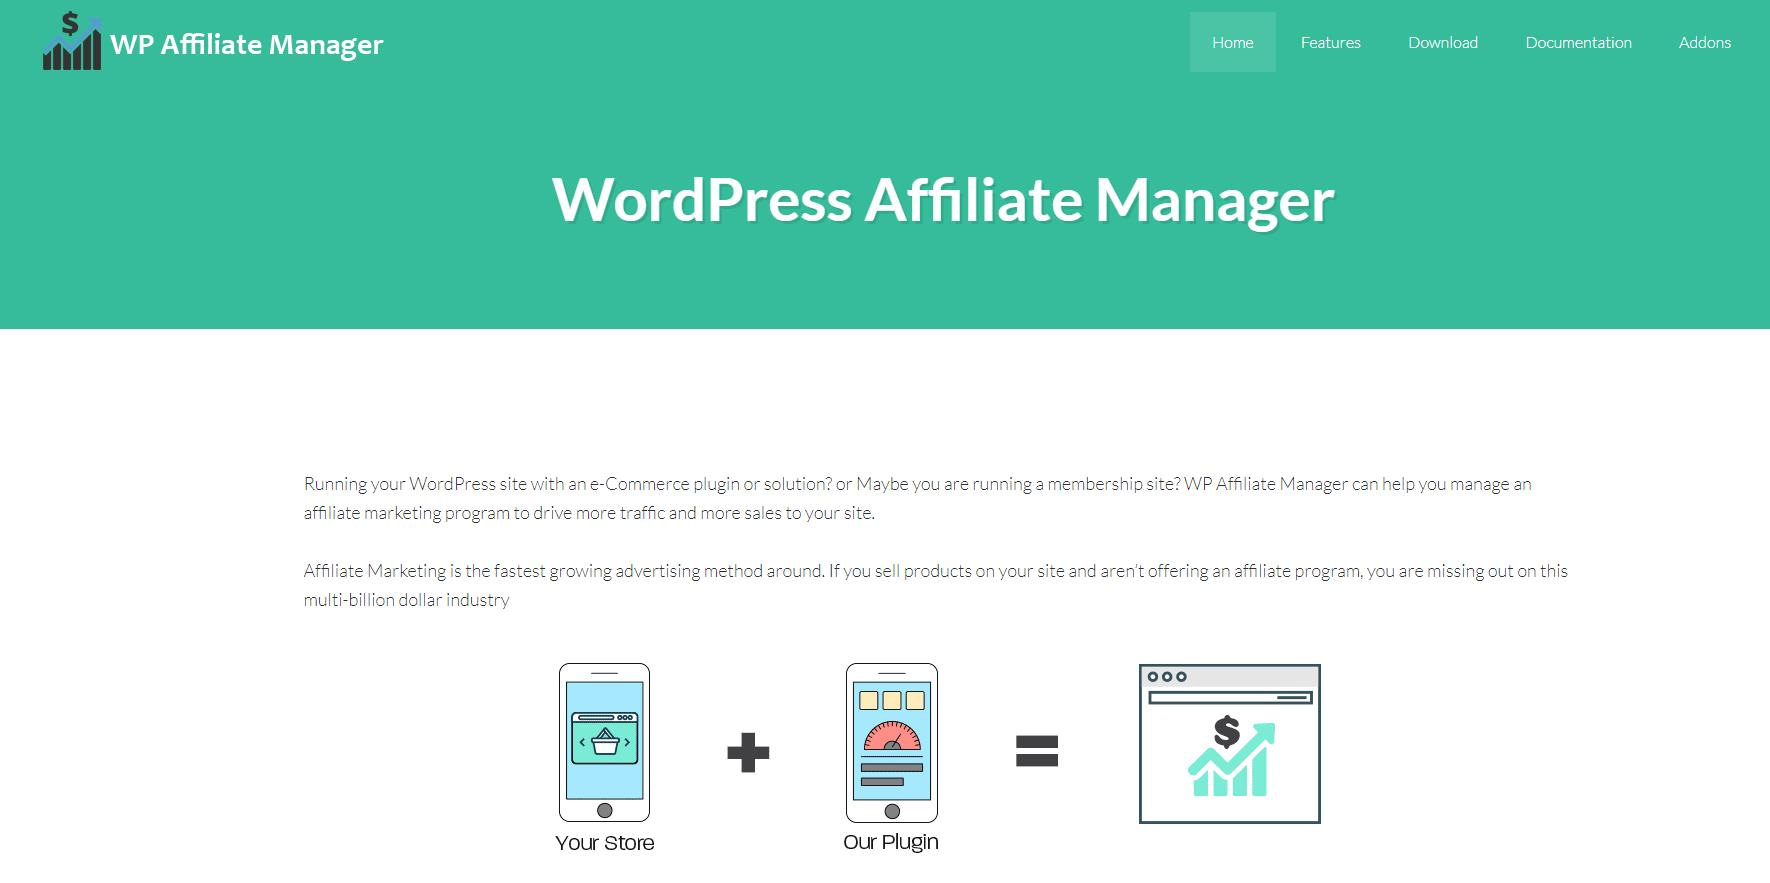 WP Affiliate Manager